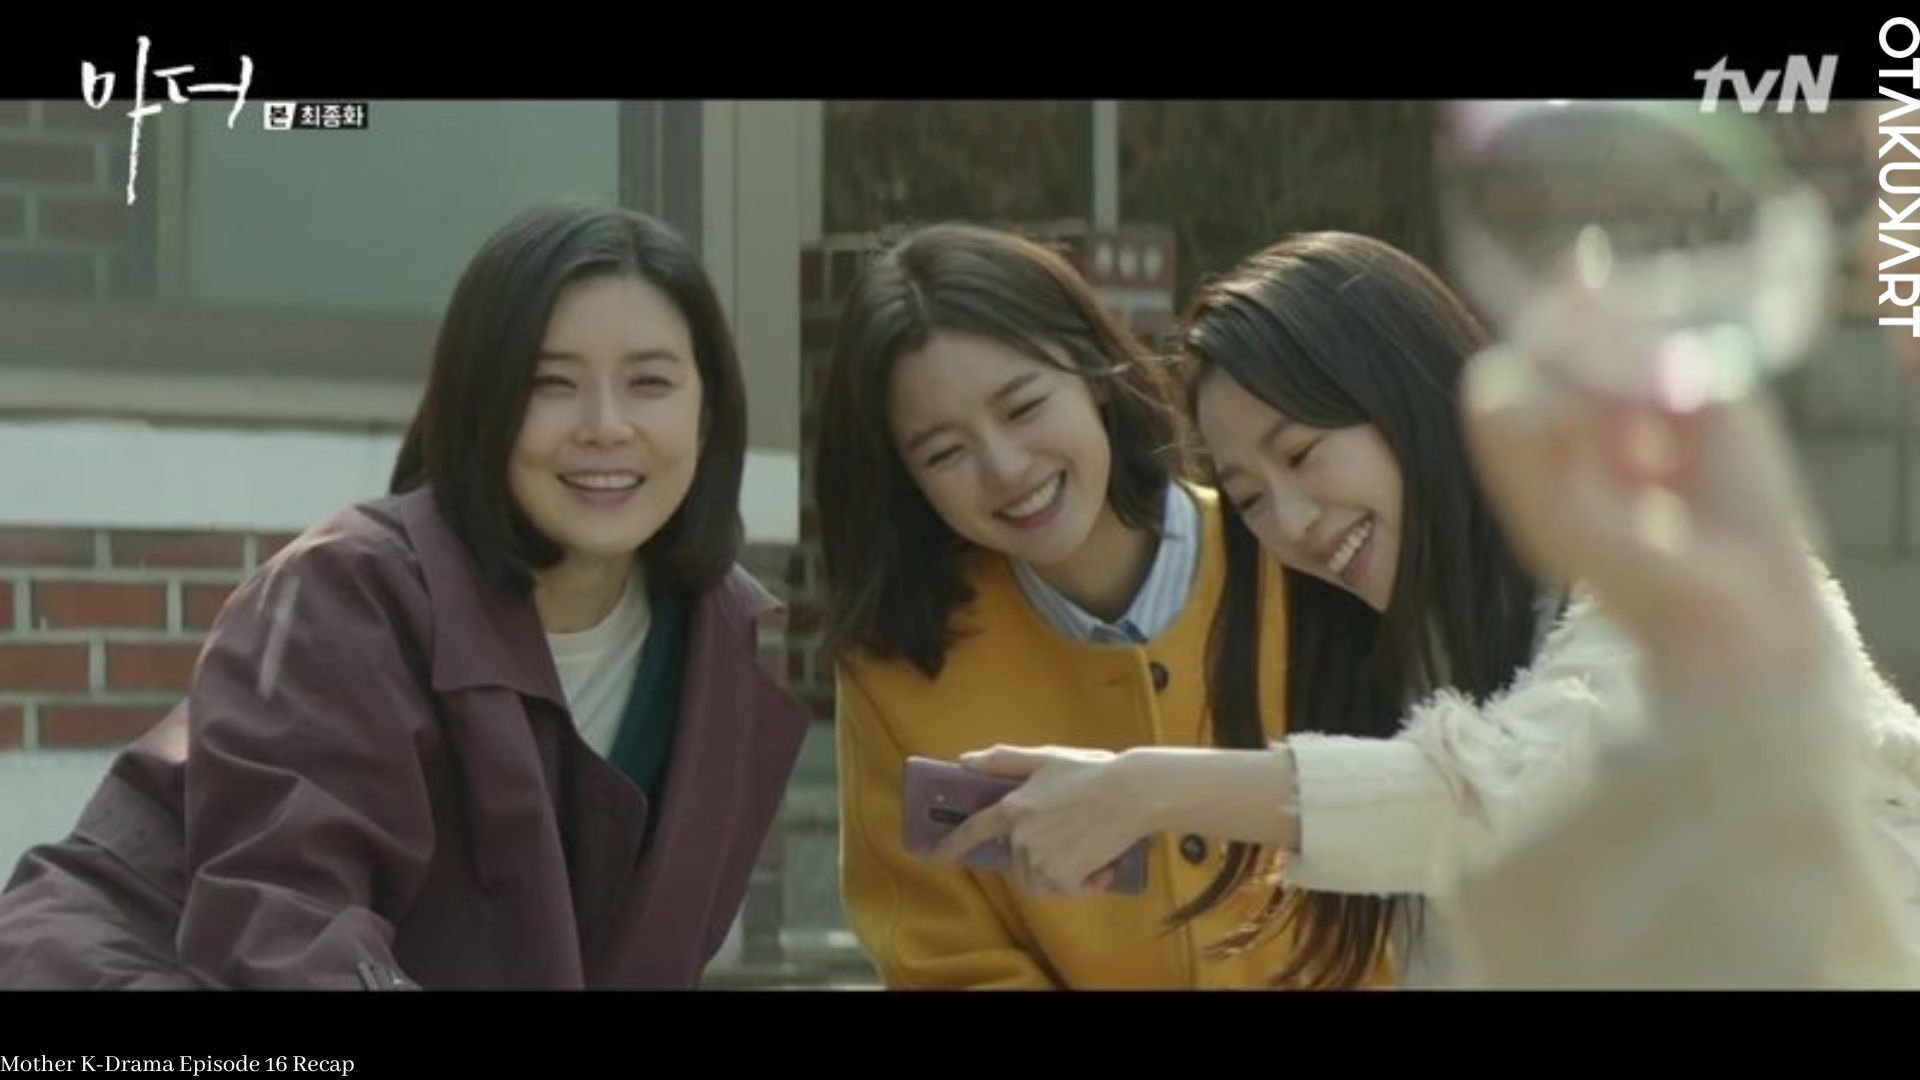 Mother K-Drama Episode 16 Recap: Ending Explained & All About It